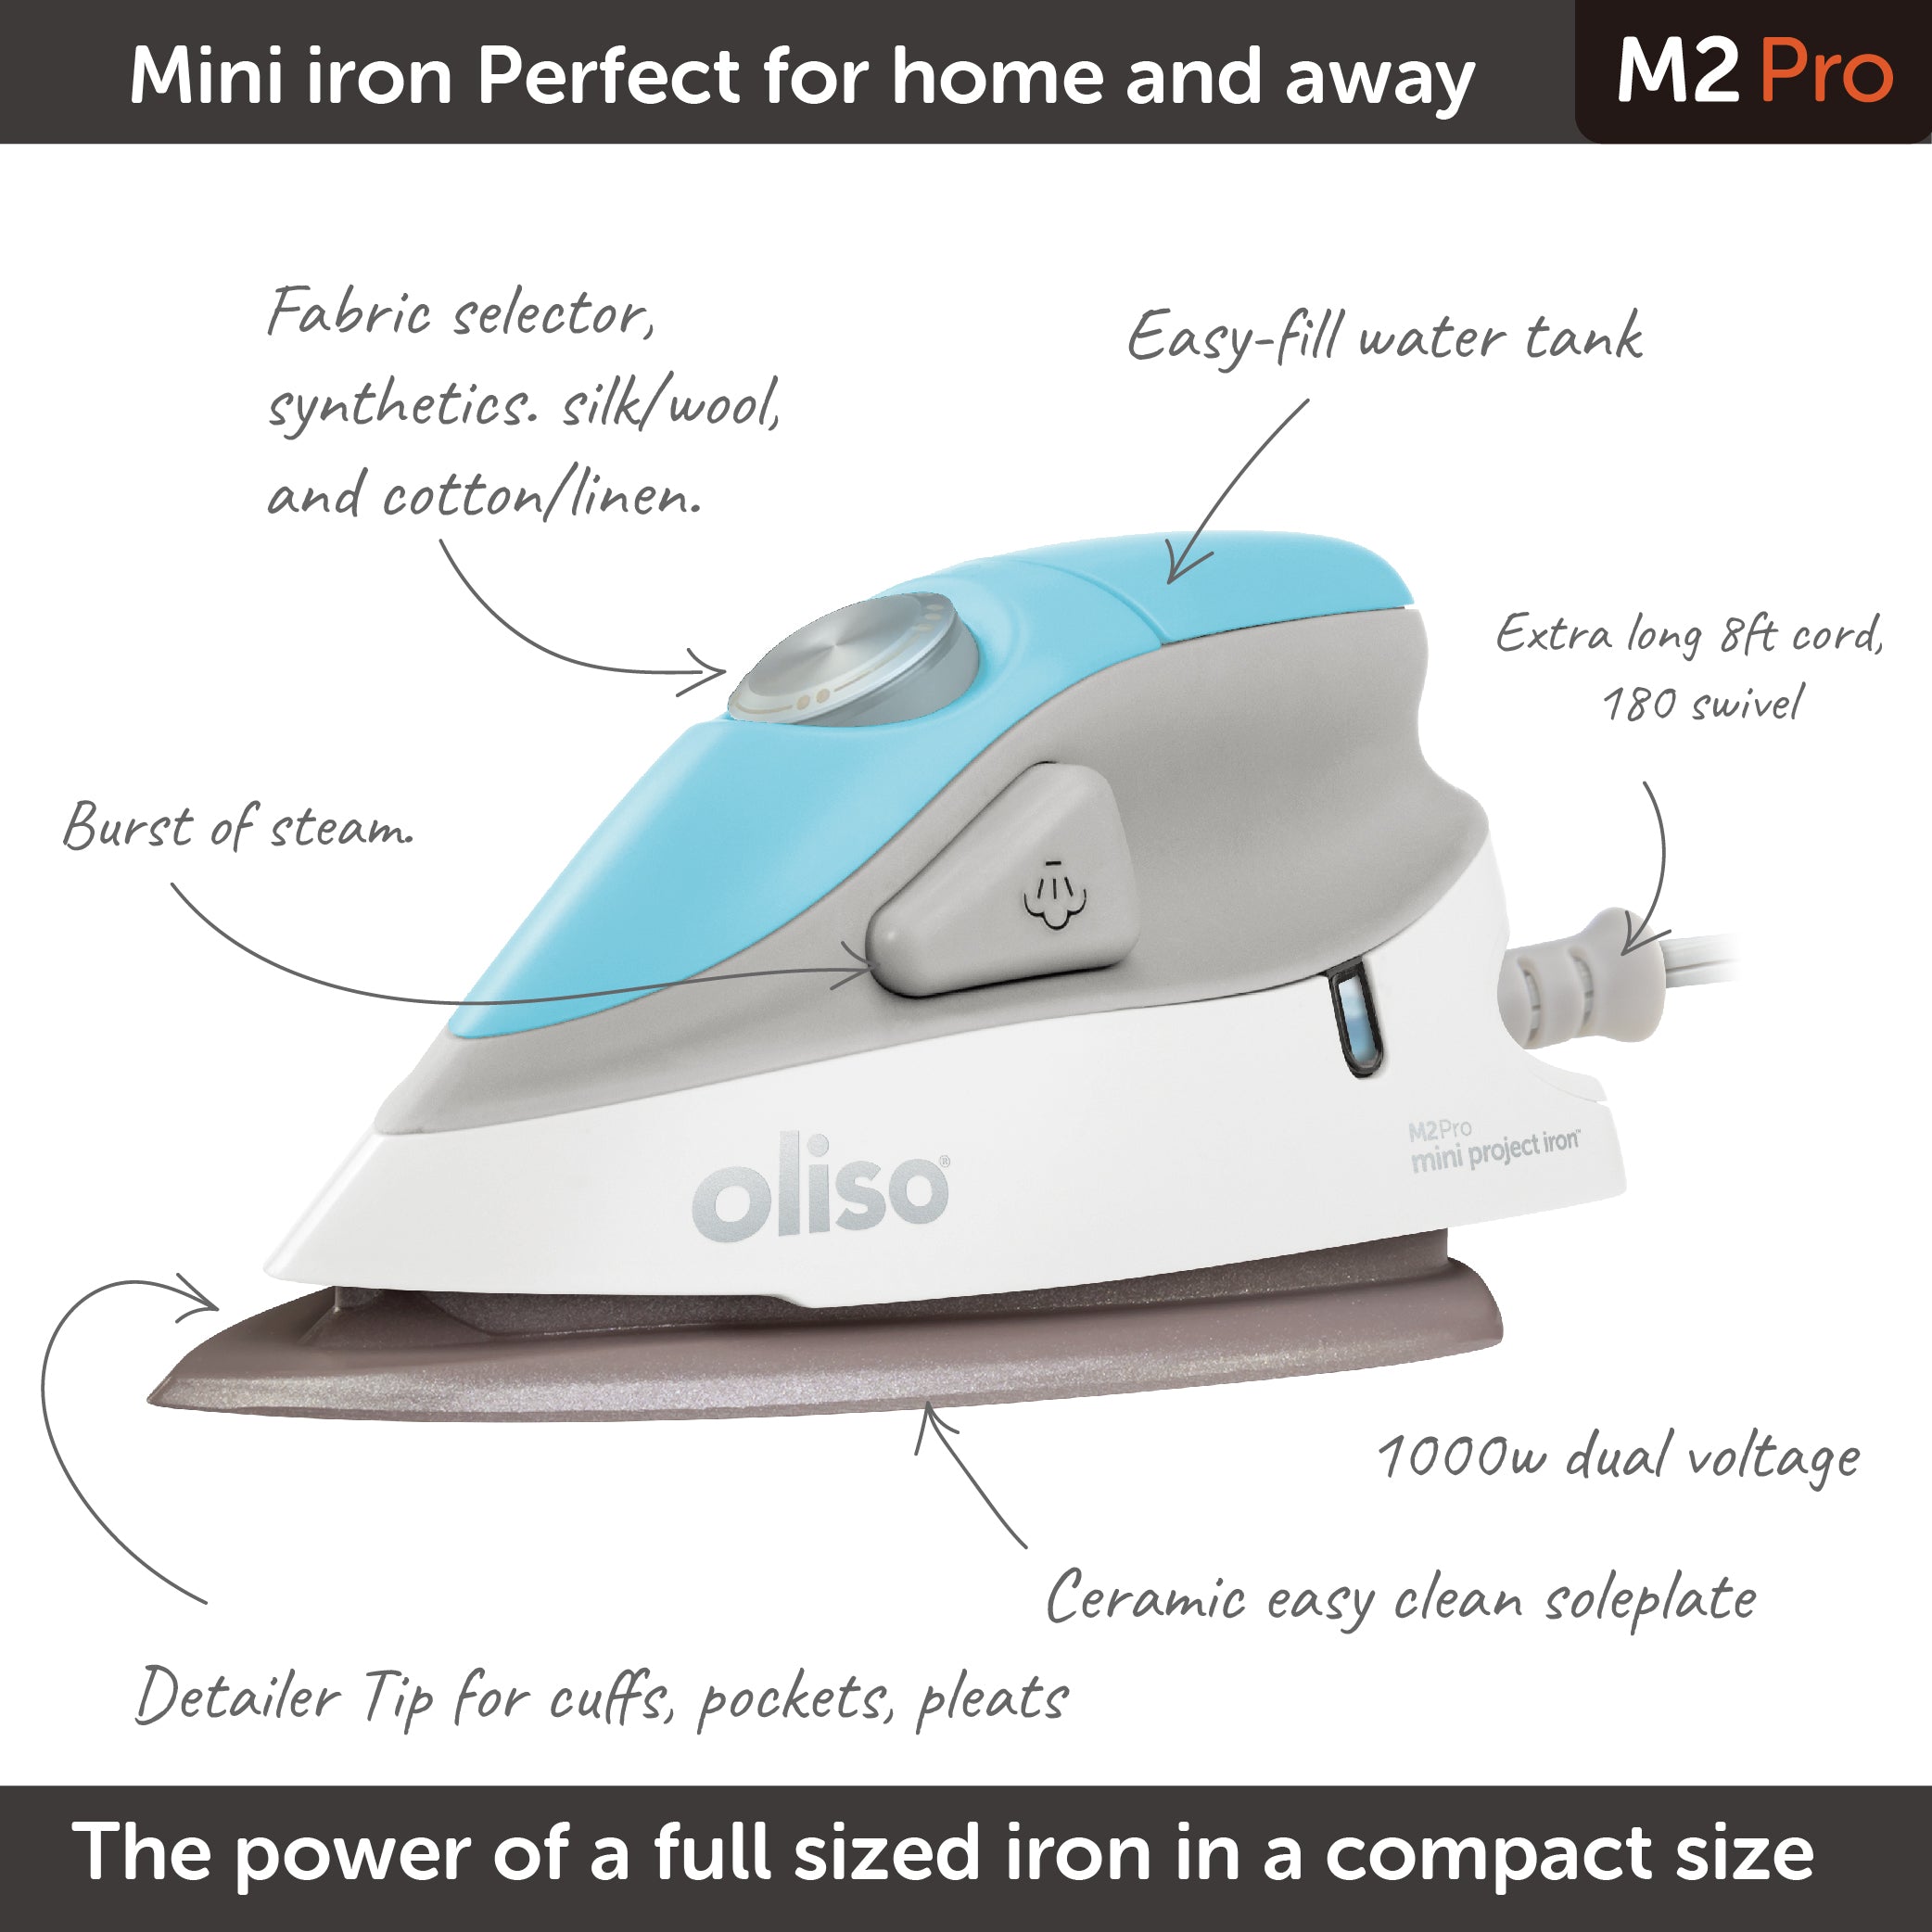 Oliso M3Pro Project Iron with Trivet in Coral M3PRO-CORAL